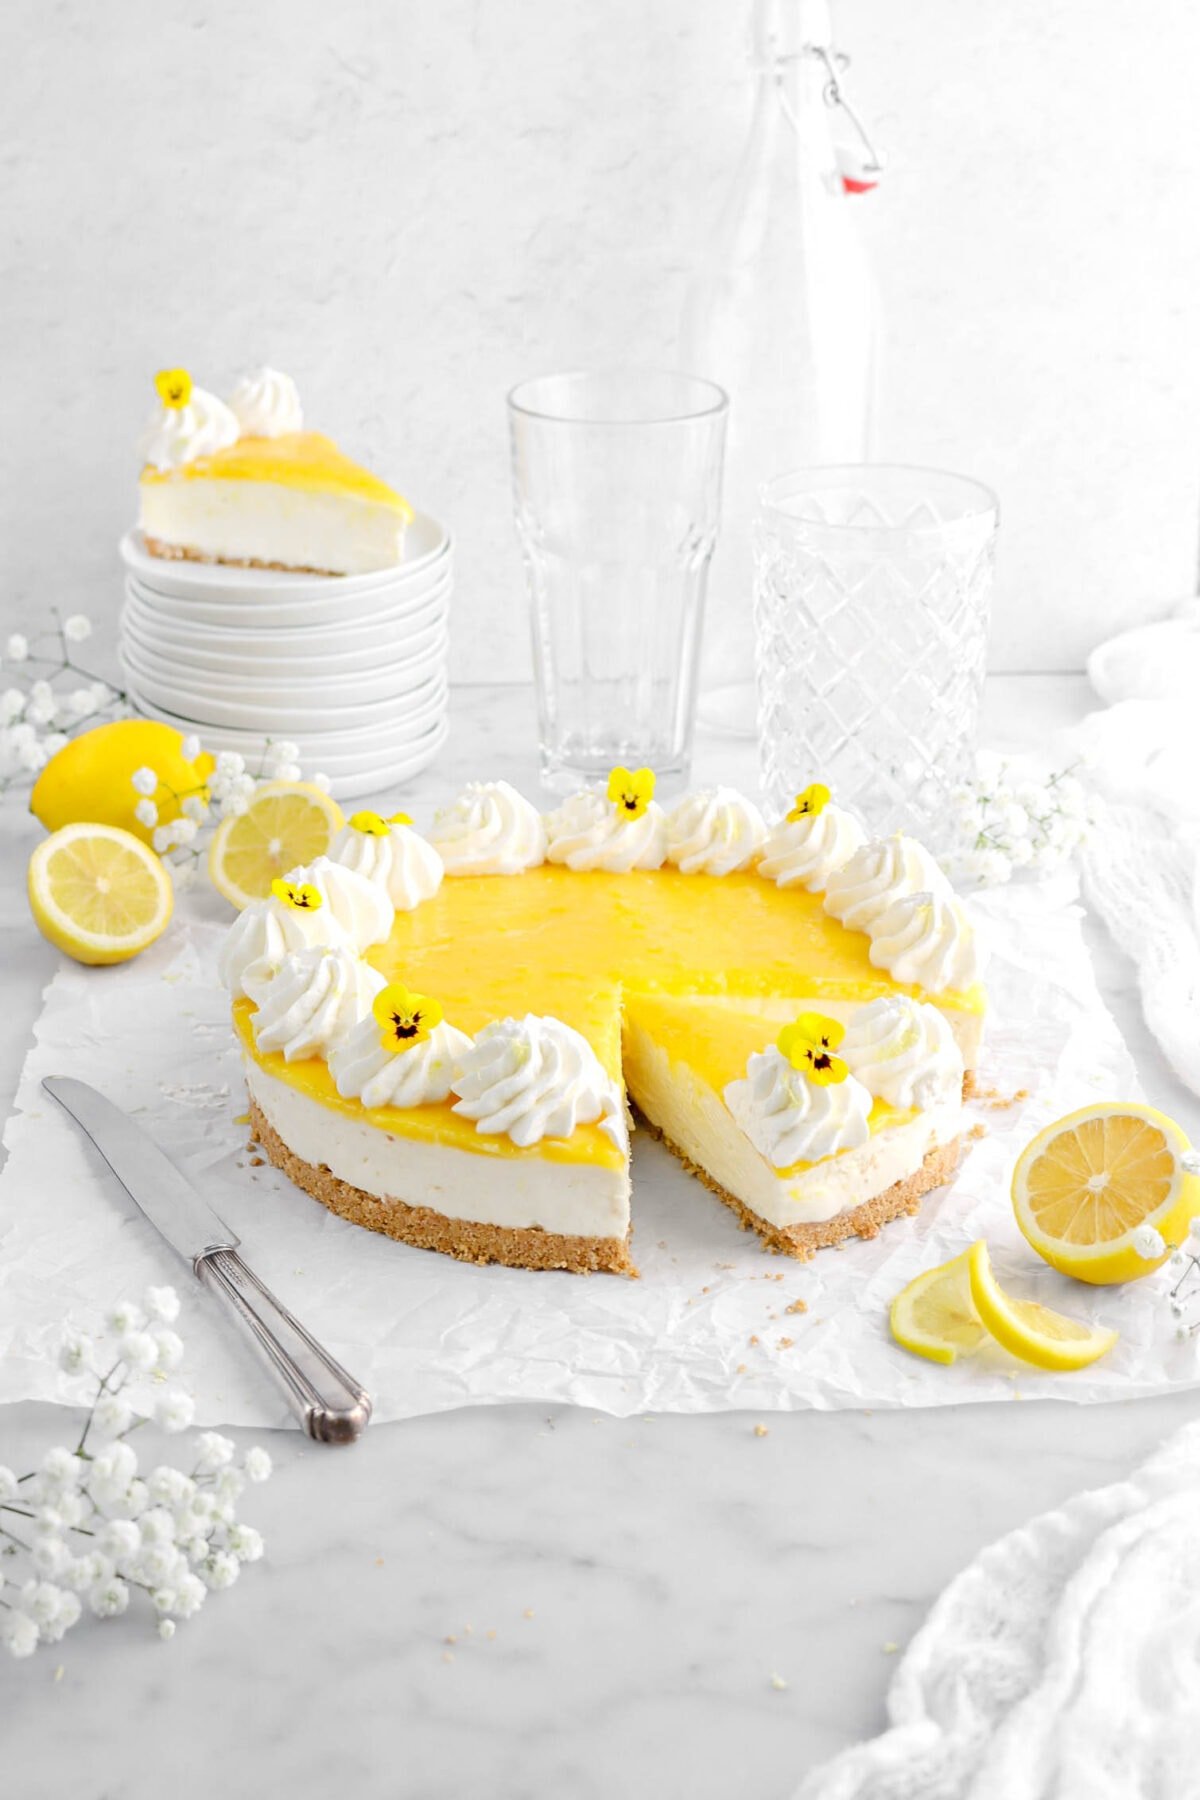 lemon cheesecake with slice cut into it, with another slice on stack of white plates behind, with flowers, and lemons around, a knife beside, empty glasses behind, and a white cheesecloth.